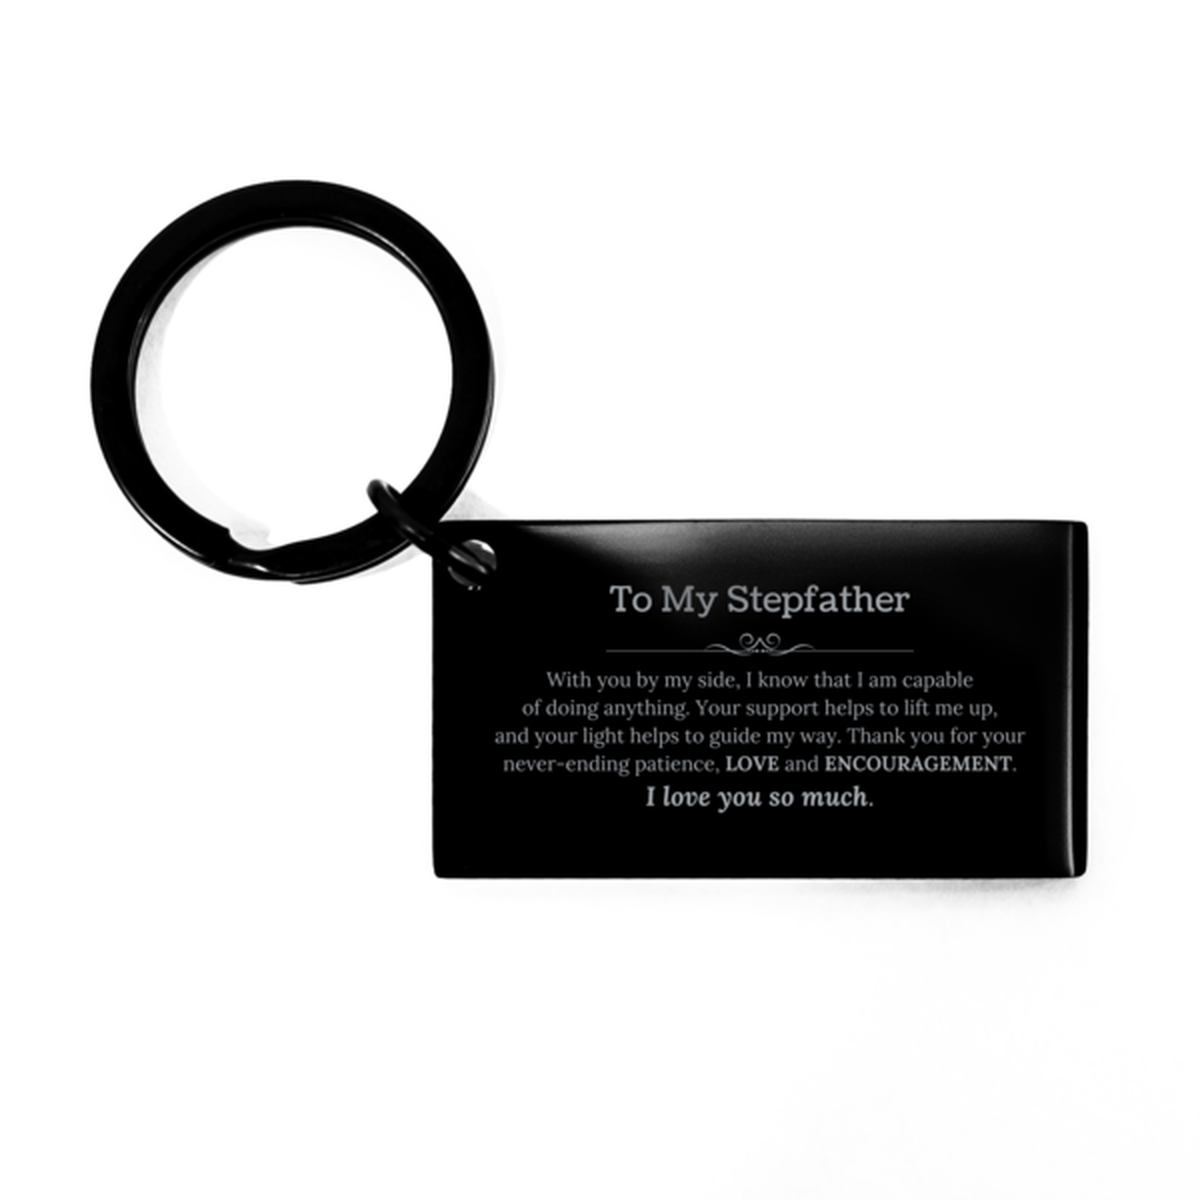 Appreciation Stepfather Keychain Gifts, To My Stepfather Birthday Christmas Wedding Keepsake Gifts for Stepfather With you by my side, I know that I am capable of doing anything. I love you so much